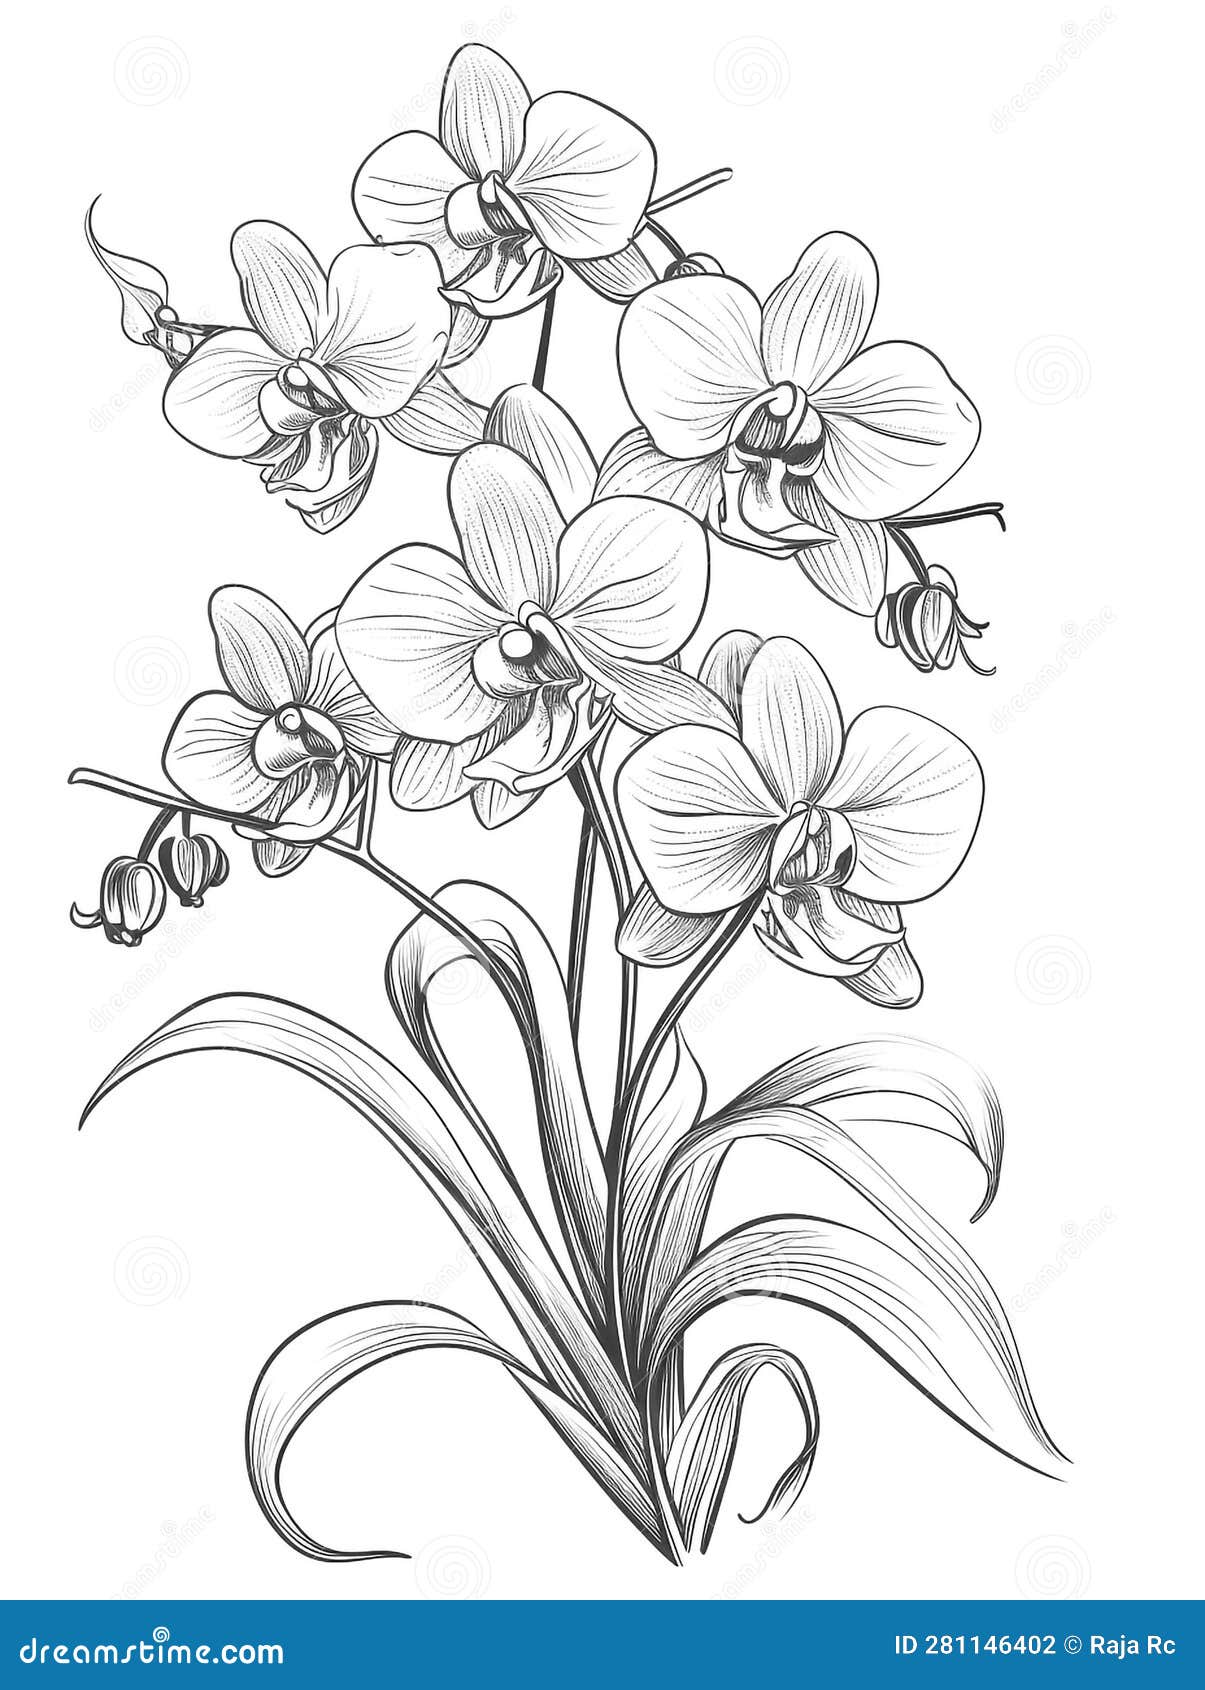 Plant Bud PNG Image, Art Bud Line Drawing Plant Flower, Flower Drawing, Plant  Drawing, Wing Drawing PNG Image For Free Download